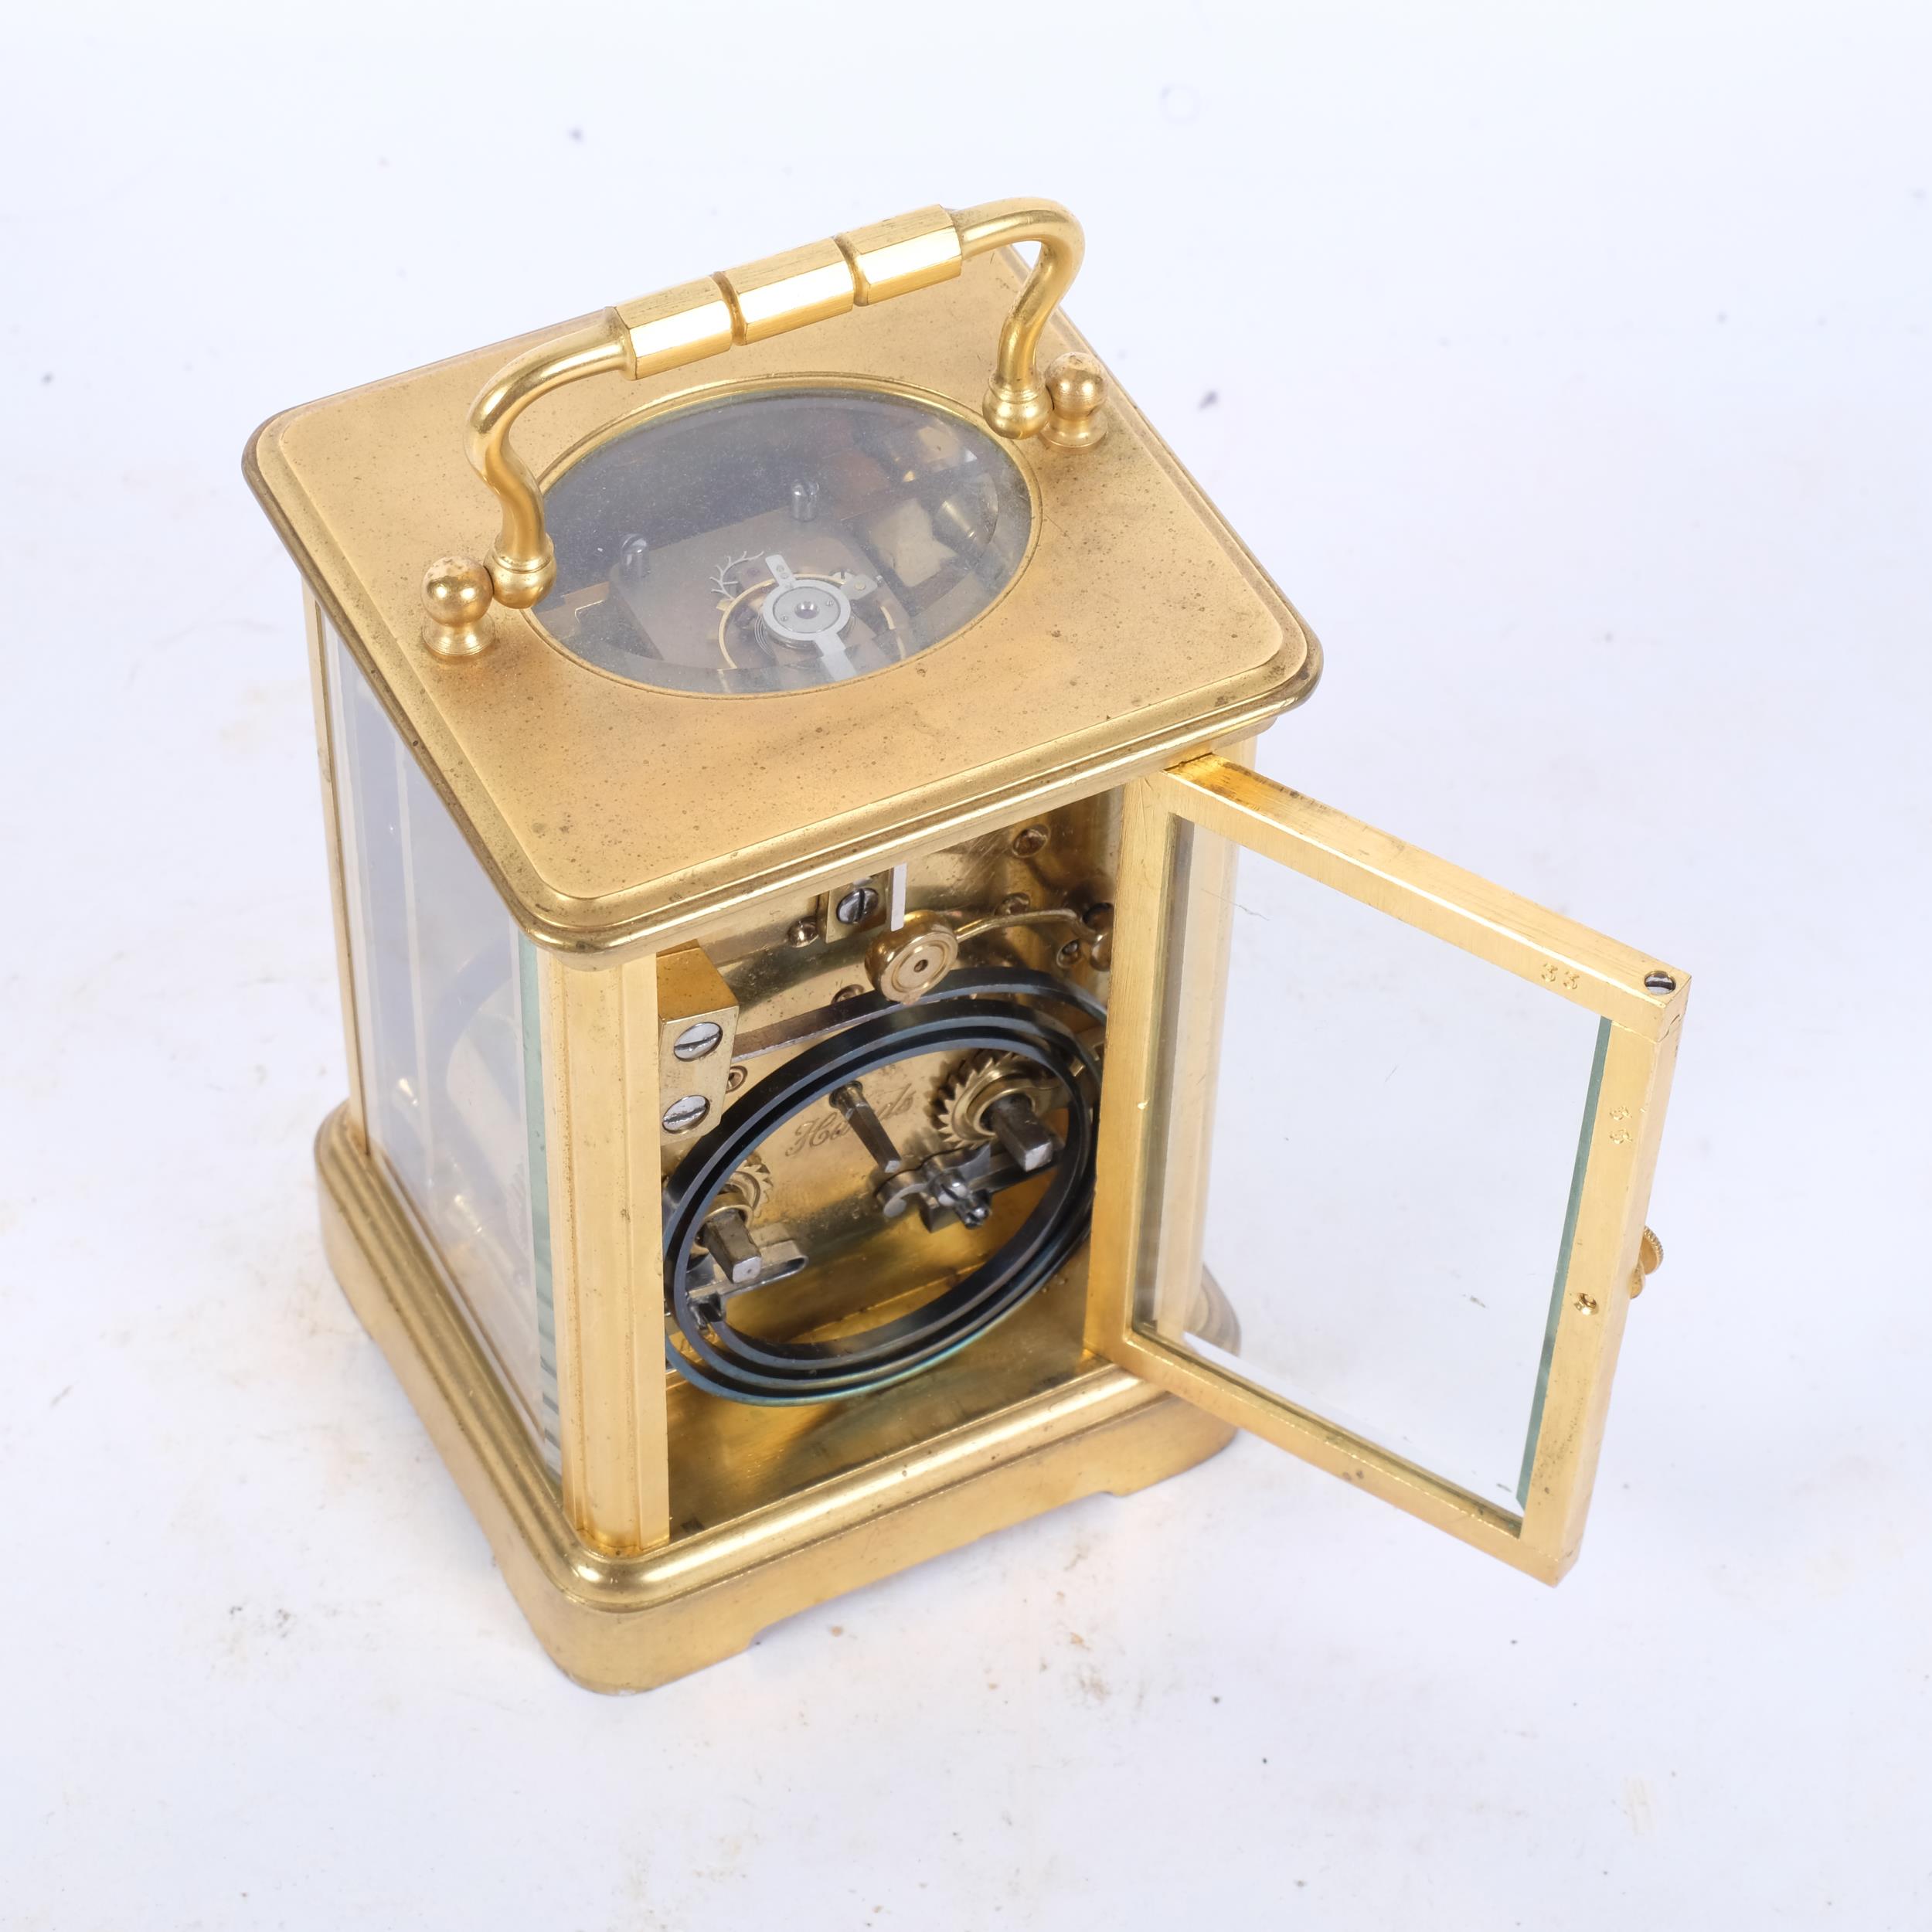 A French brass-cased striking carriage clock, H11.5cm not including handle - Image 2 of 2